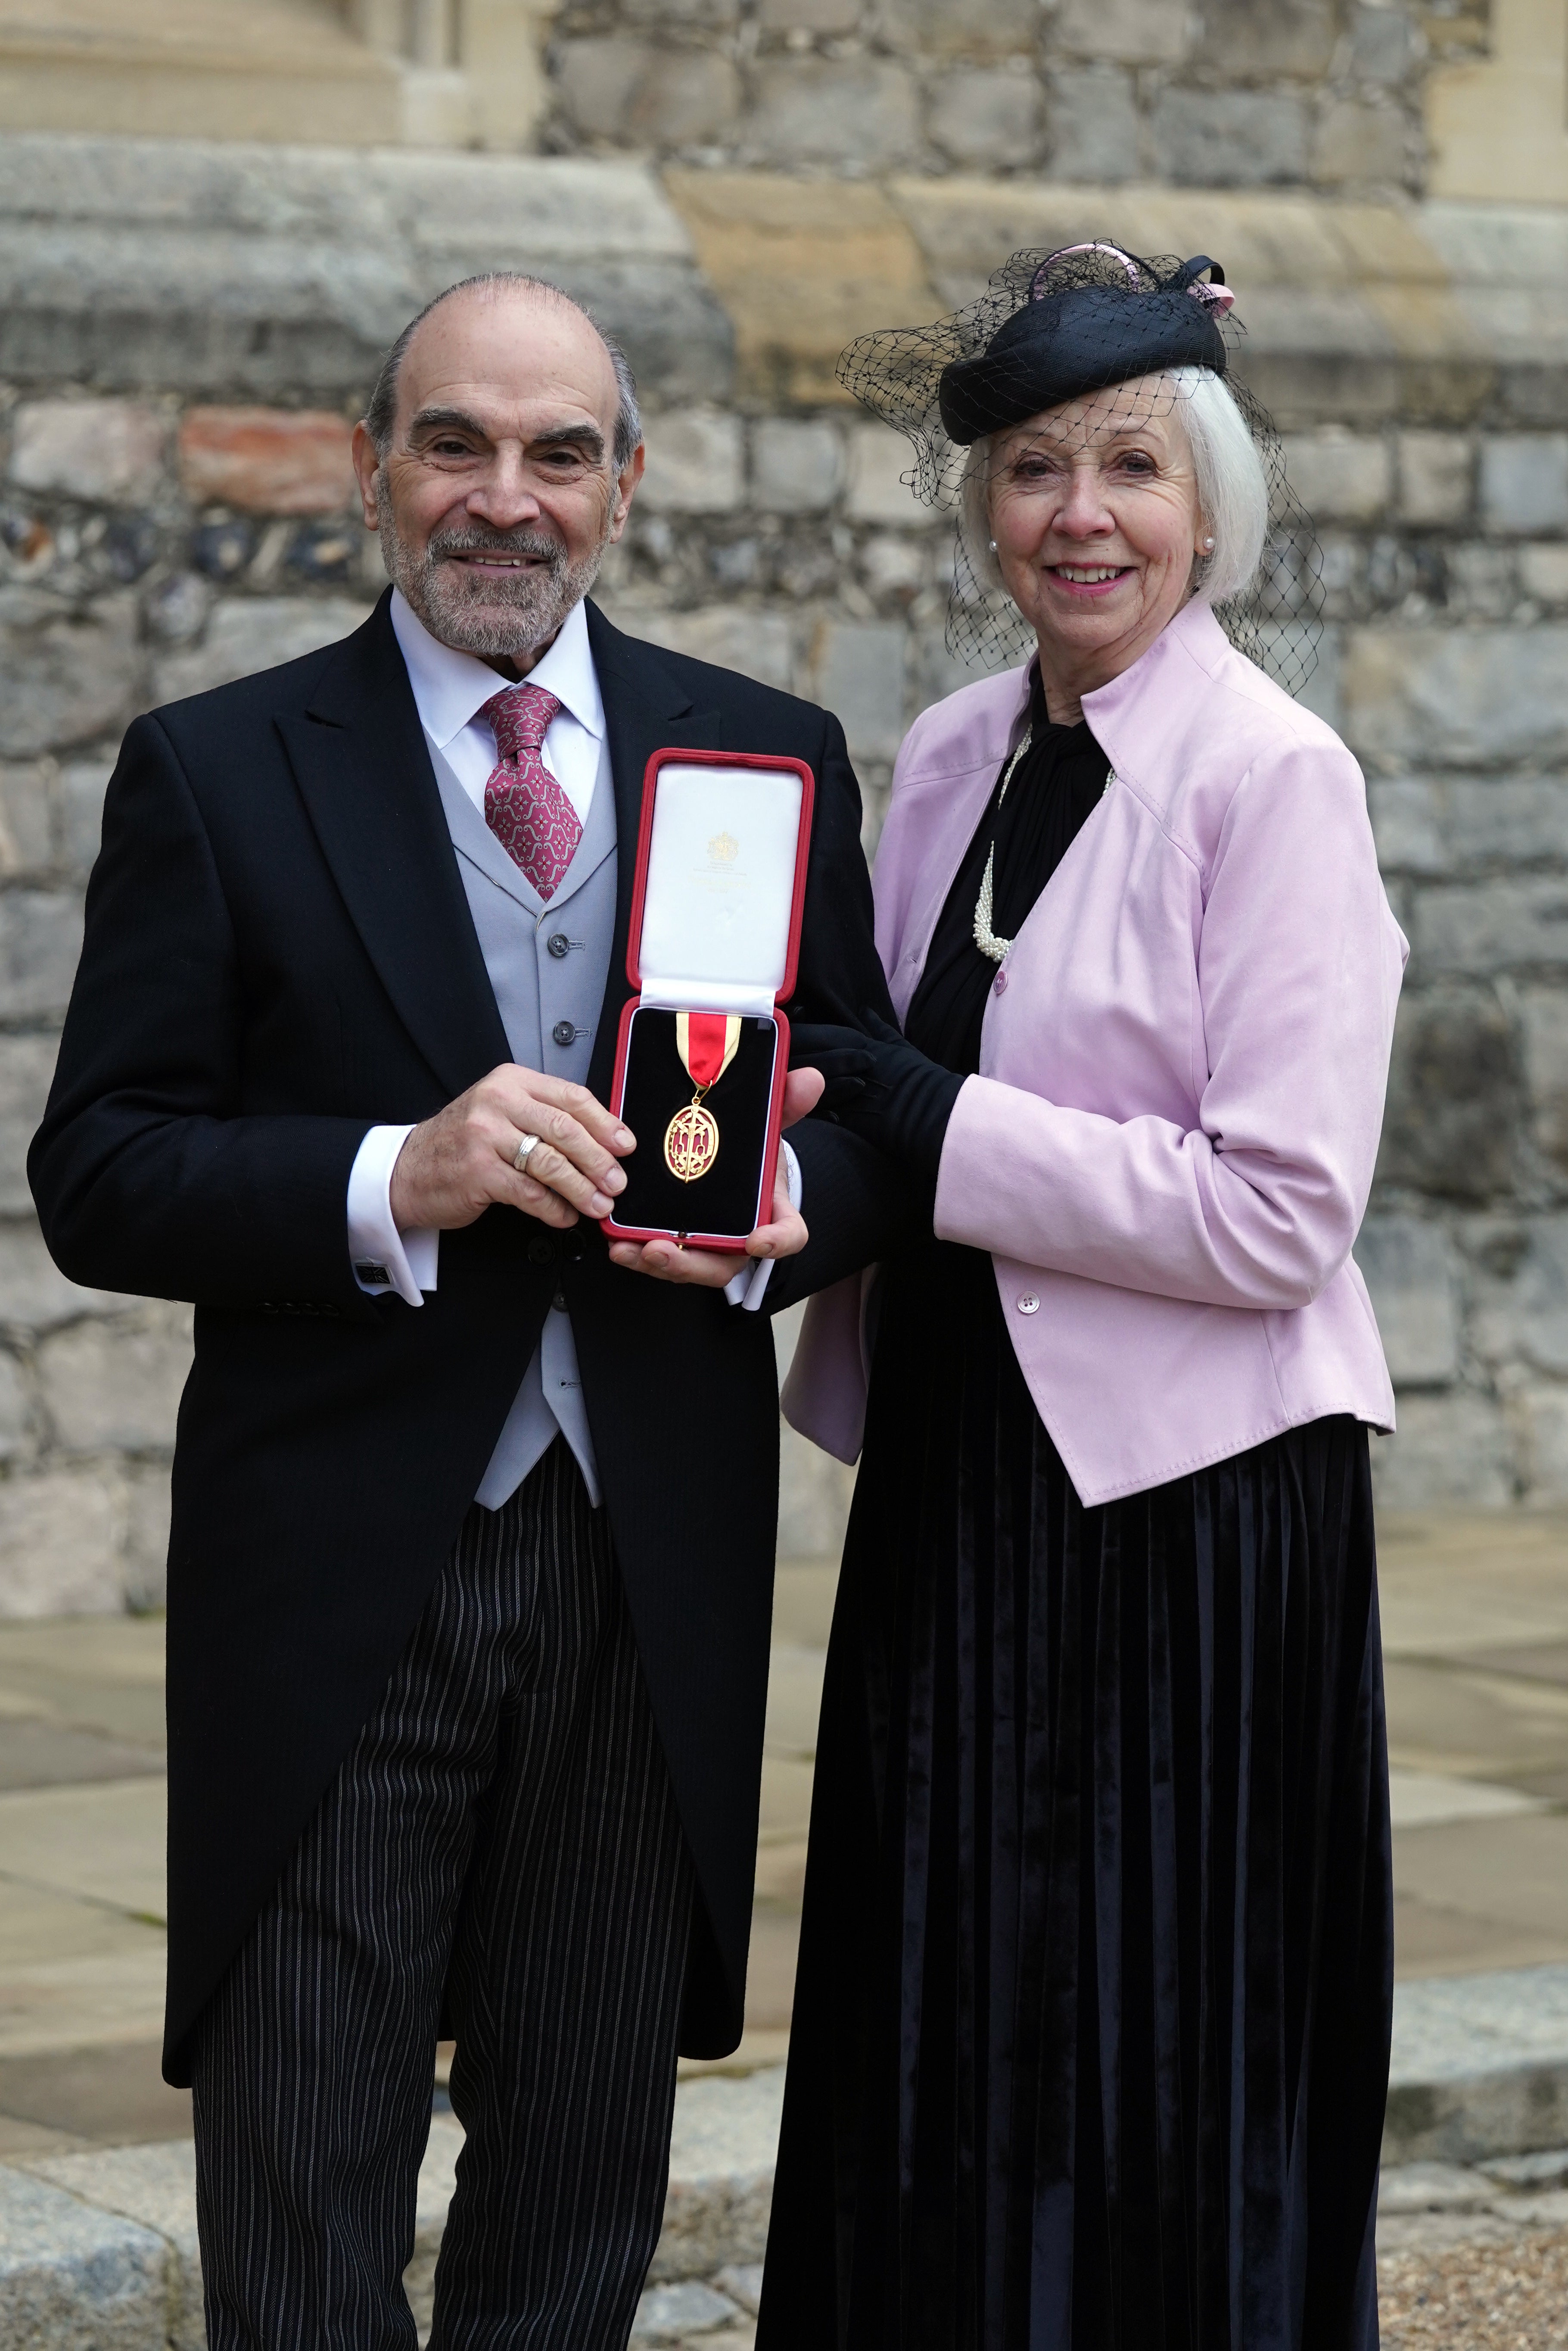 Sir David Suchet and his wife, Sheila Ferris, after he received his knighthood at Windsor Castle (Steve Parsons/PA)